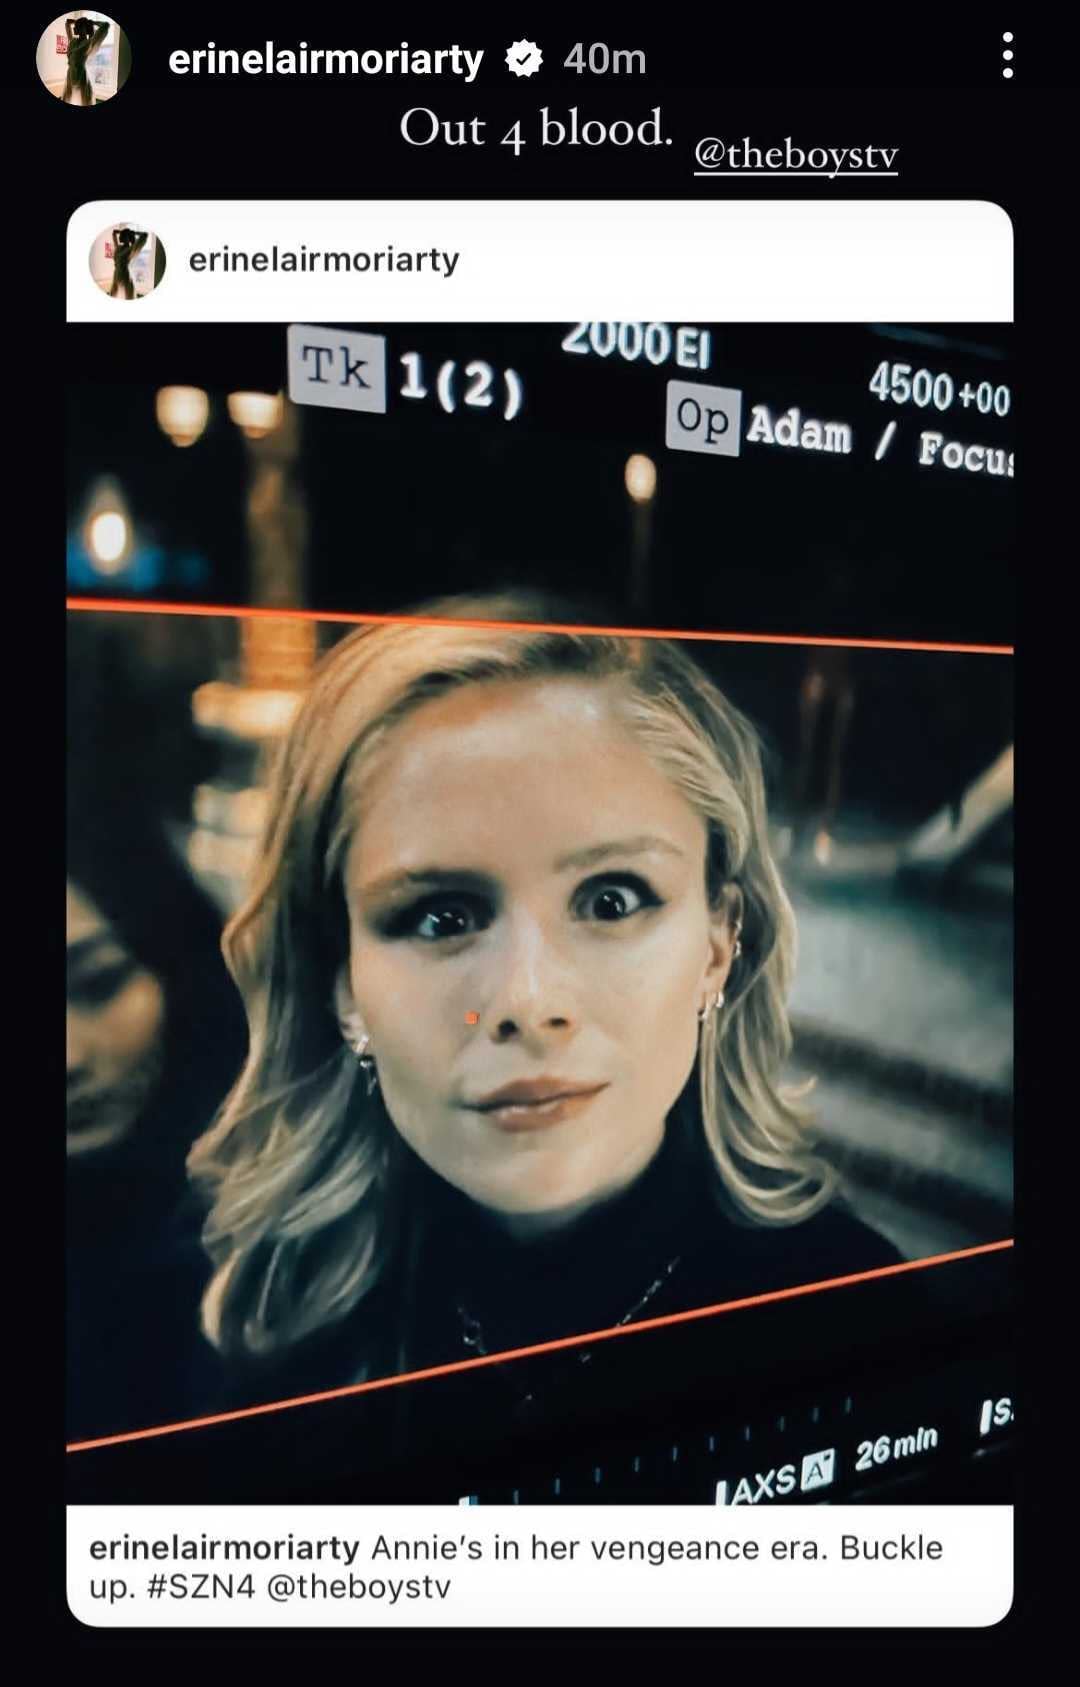 The Boys' Erin Moriarty Teases Her Role as Starlight in Season 4